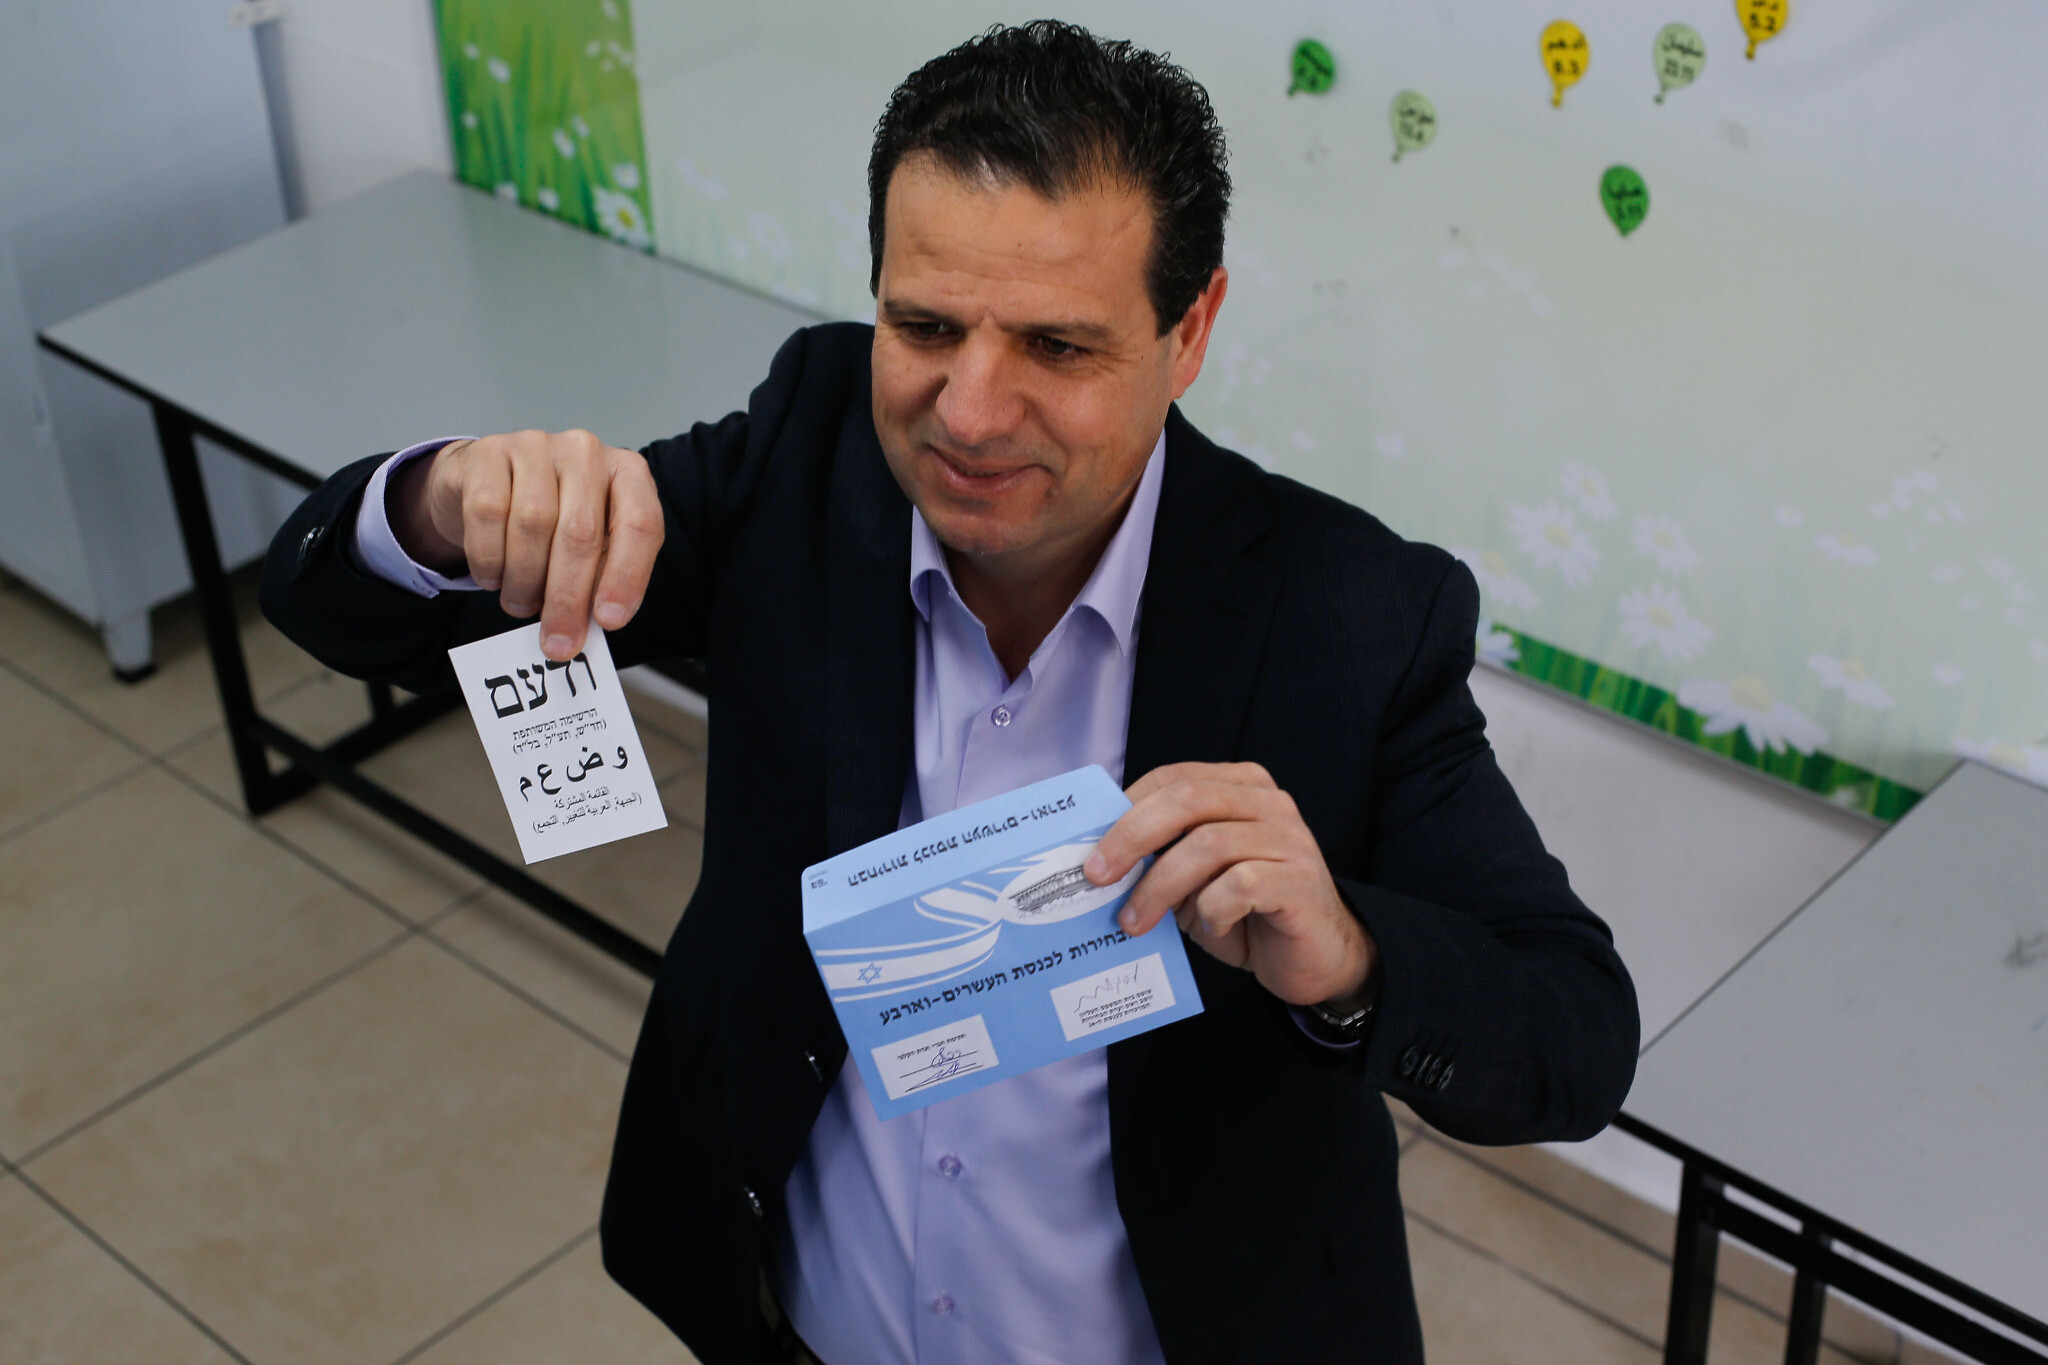 Joint List party leader Ayman Odeh casts his ballot at a voting station in Haifa during the Knesset elections, March 23, 2021. (Jamal Awad/Flash90)